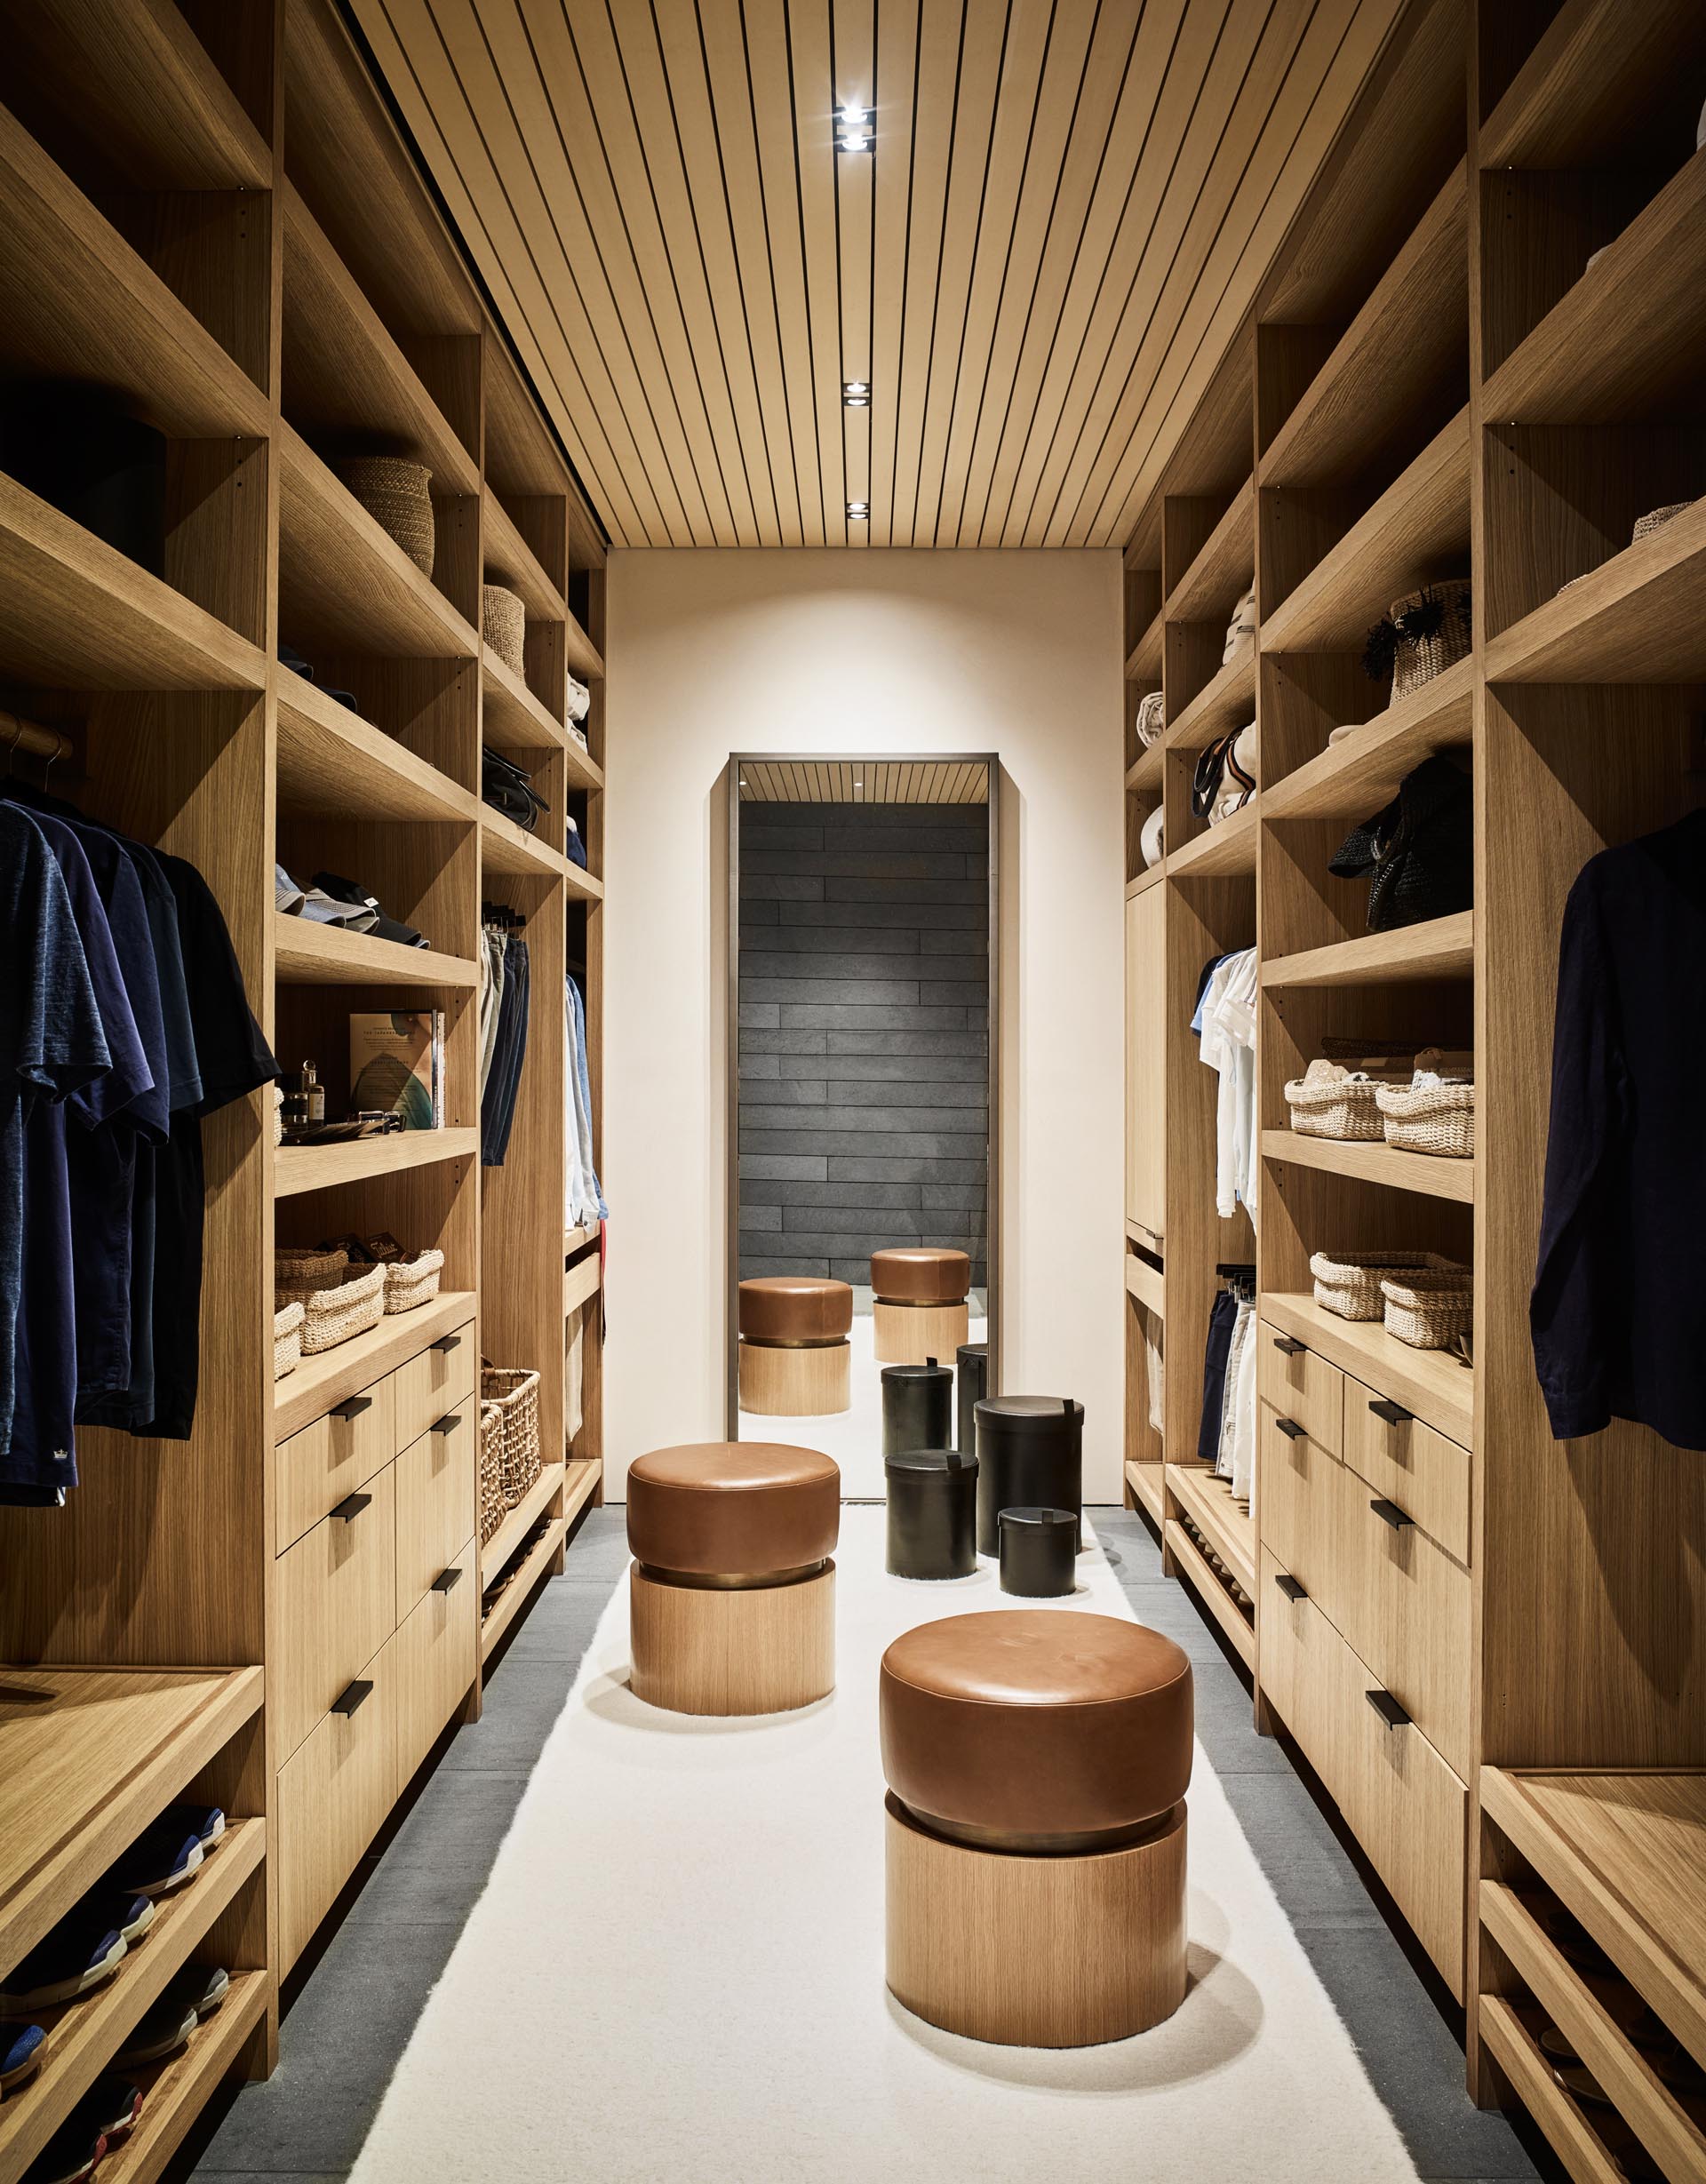 A modern walk-in closet with a floor-to-ceiling shelving, drawers, and space for hanging clothes.